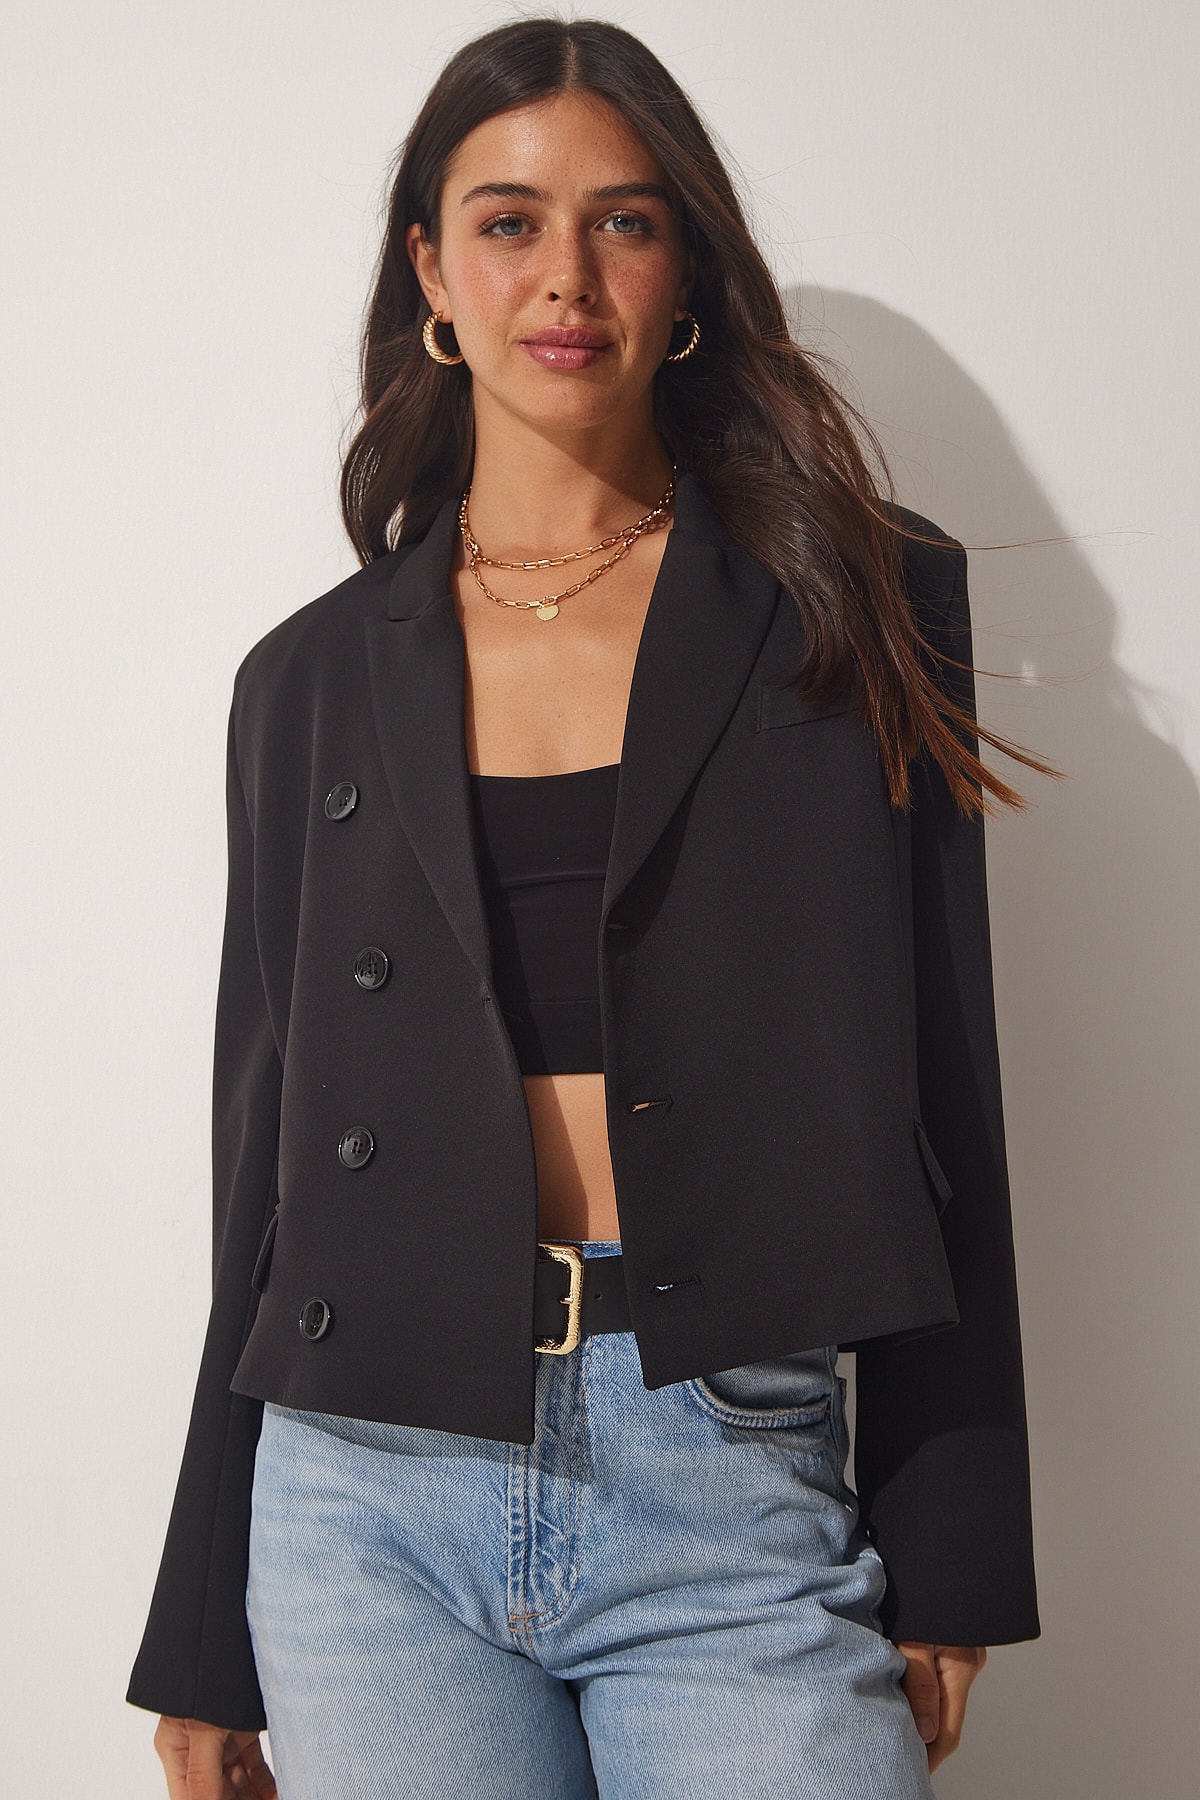 Happiness İstanbul Women's Black Crop Fit Double Breasted Blazer Jacket